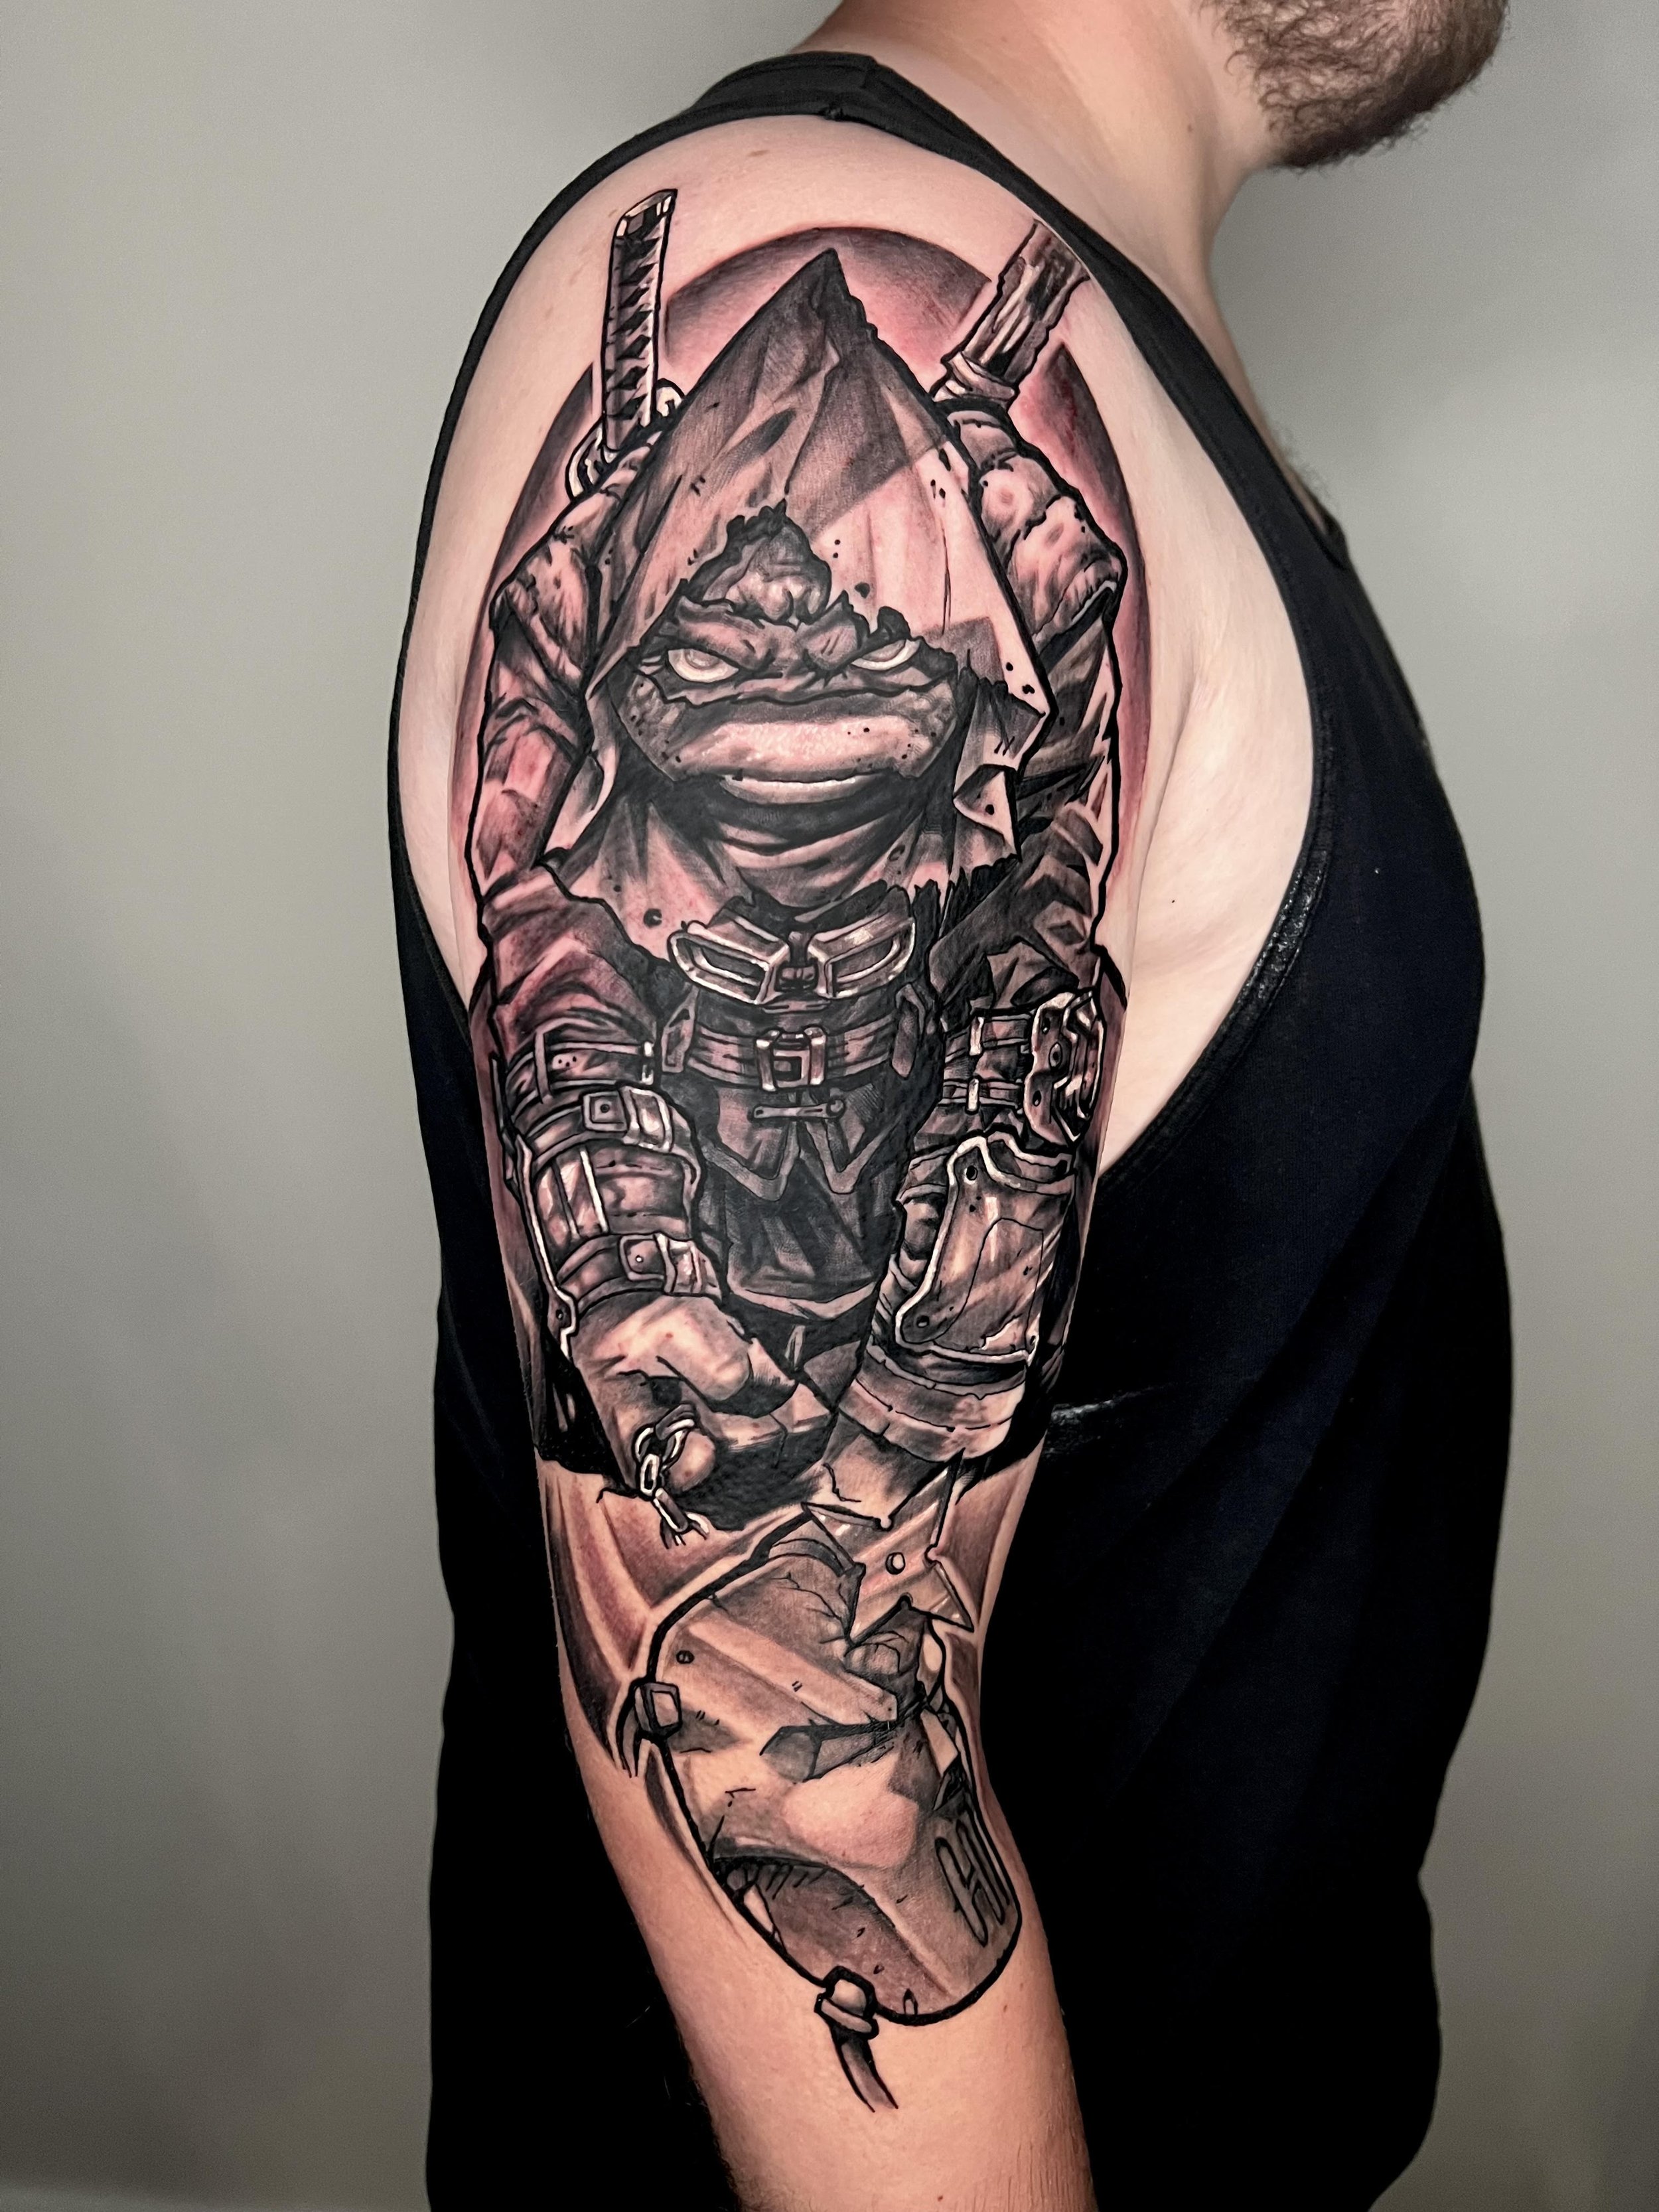 Black and grey Atlas tattoo on the inner forearm.